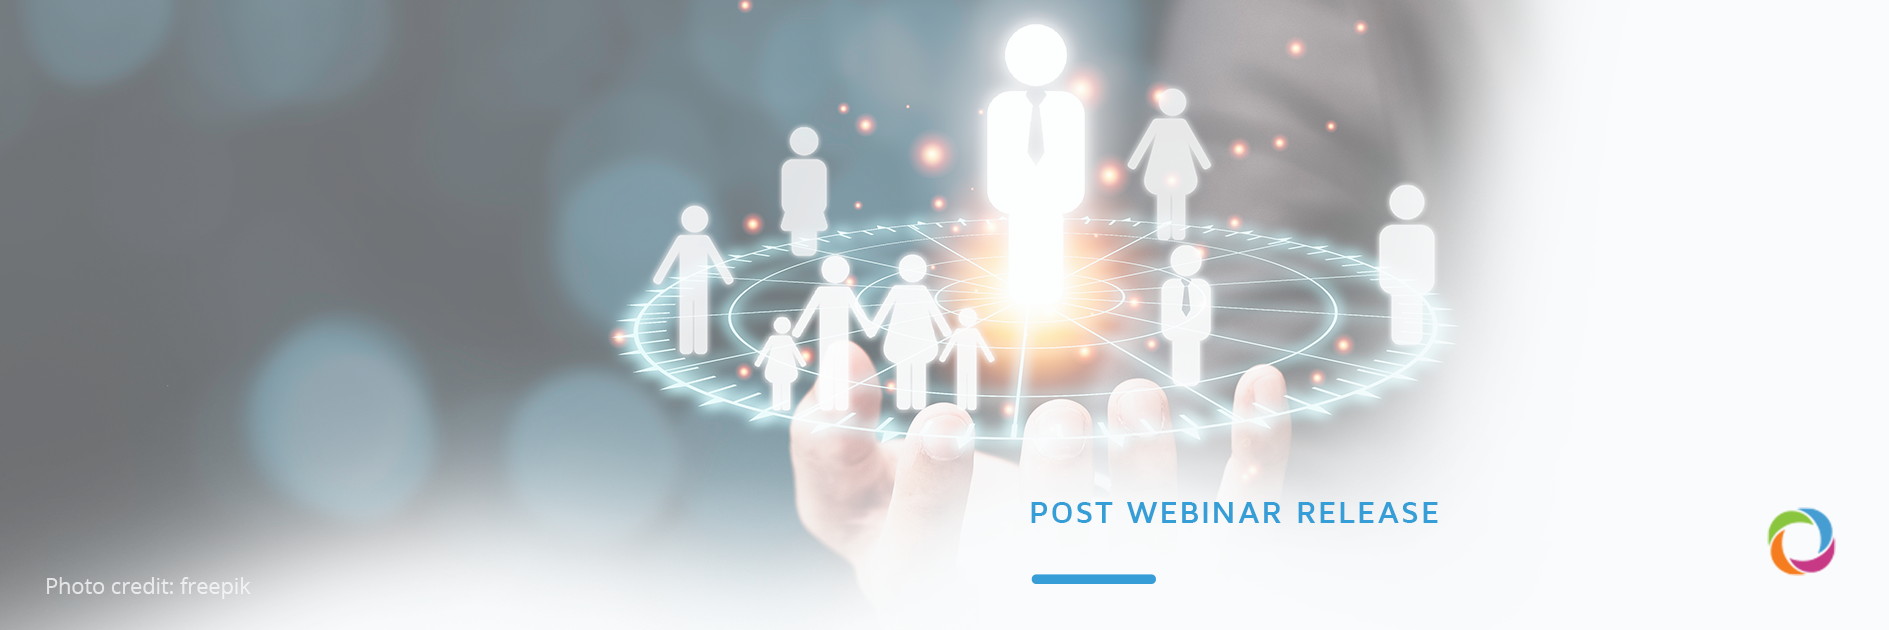 Best practices to recruit international experts for donor funded projects | Post Webinar Release